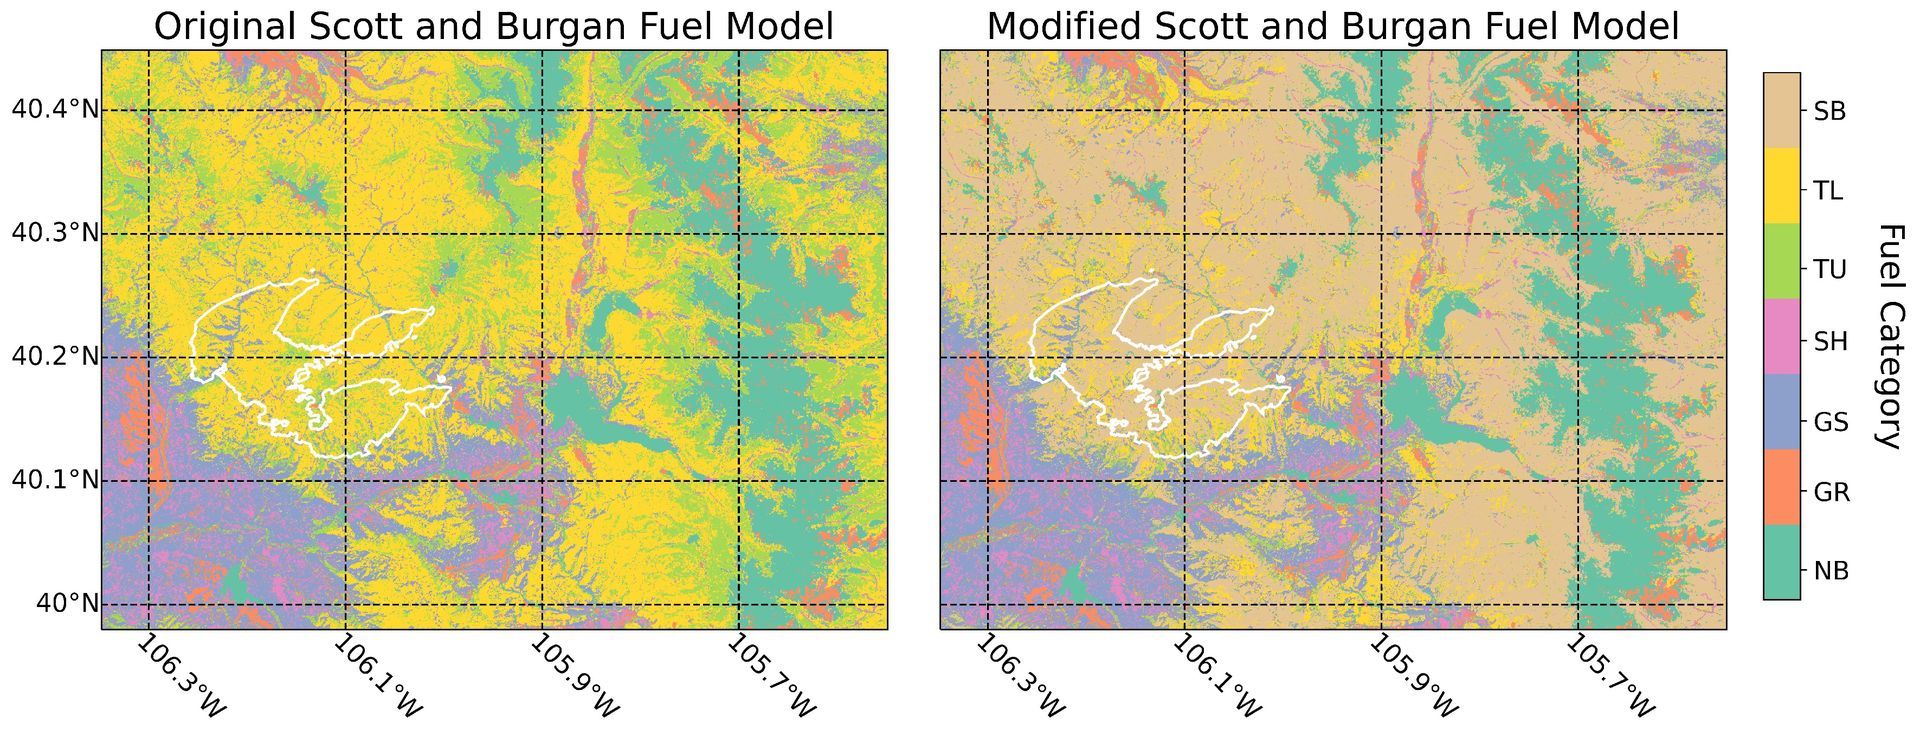 A new ML method that employs artificial intelligence (AI) to enhance wildfire forecasts has been developed by scientists at the NCAR.